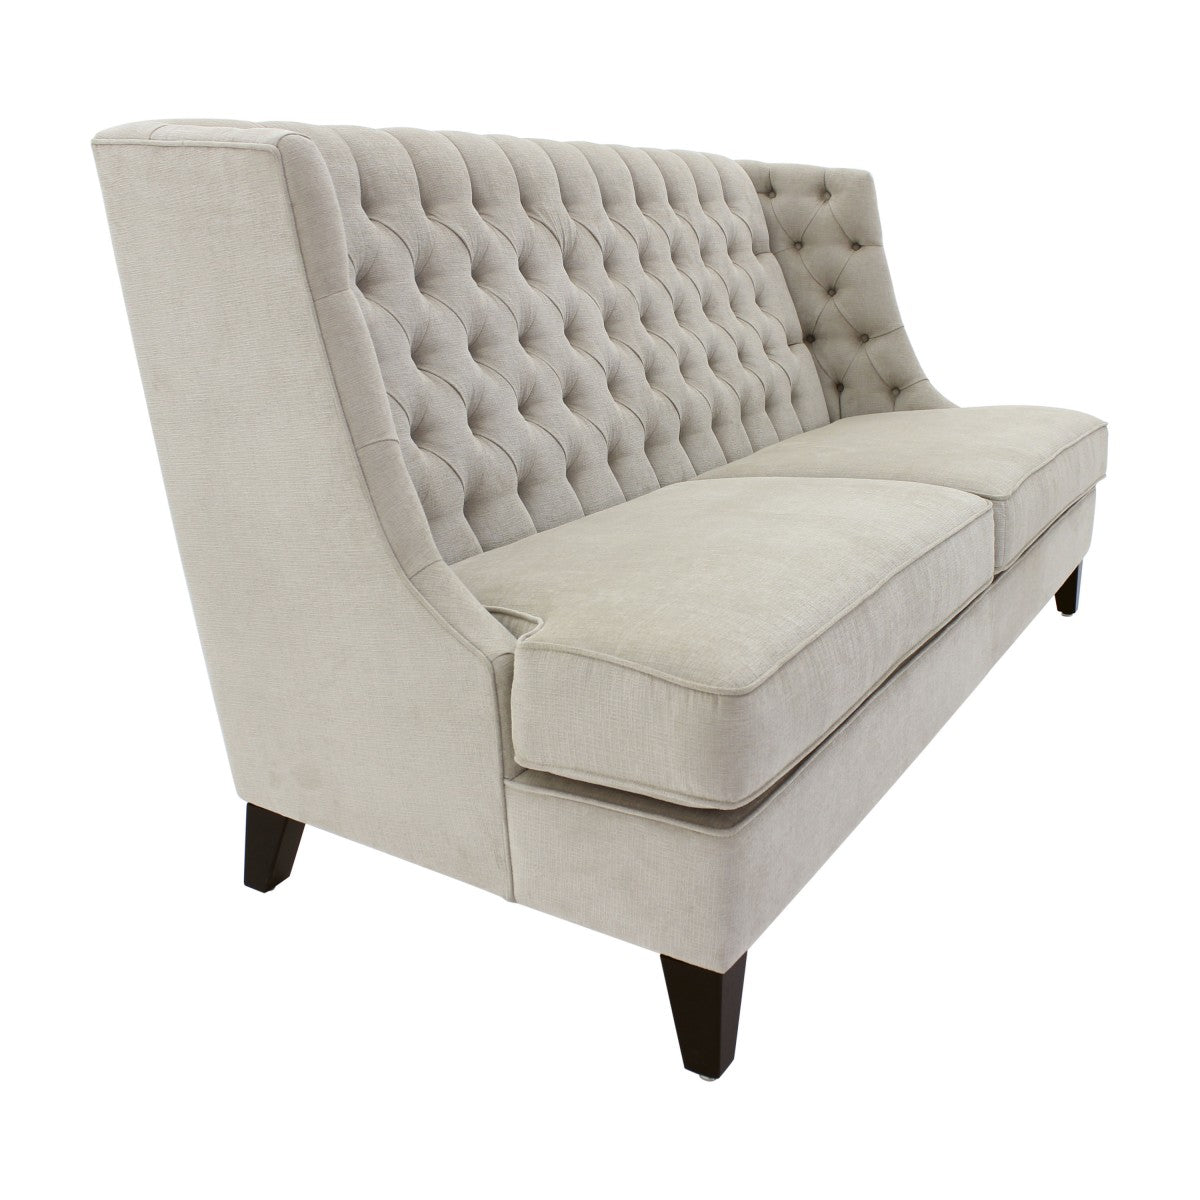 Fortuna Bespoke Upholstered Modern Style Four Seater Sofa MS9850F Custom Made To Order